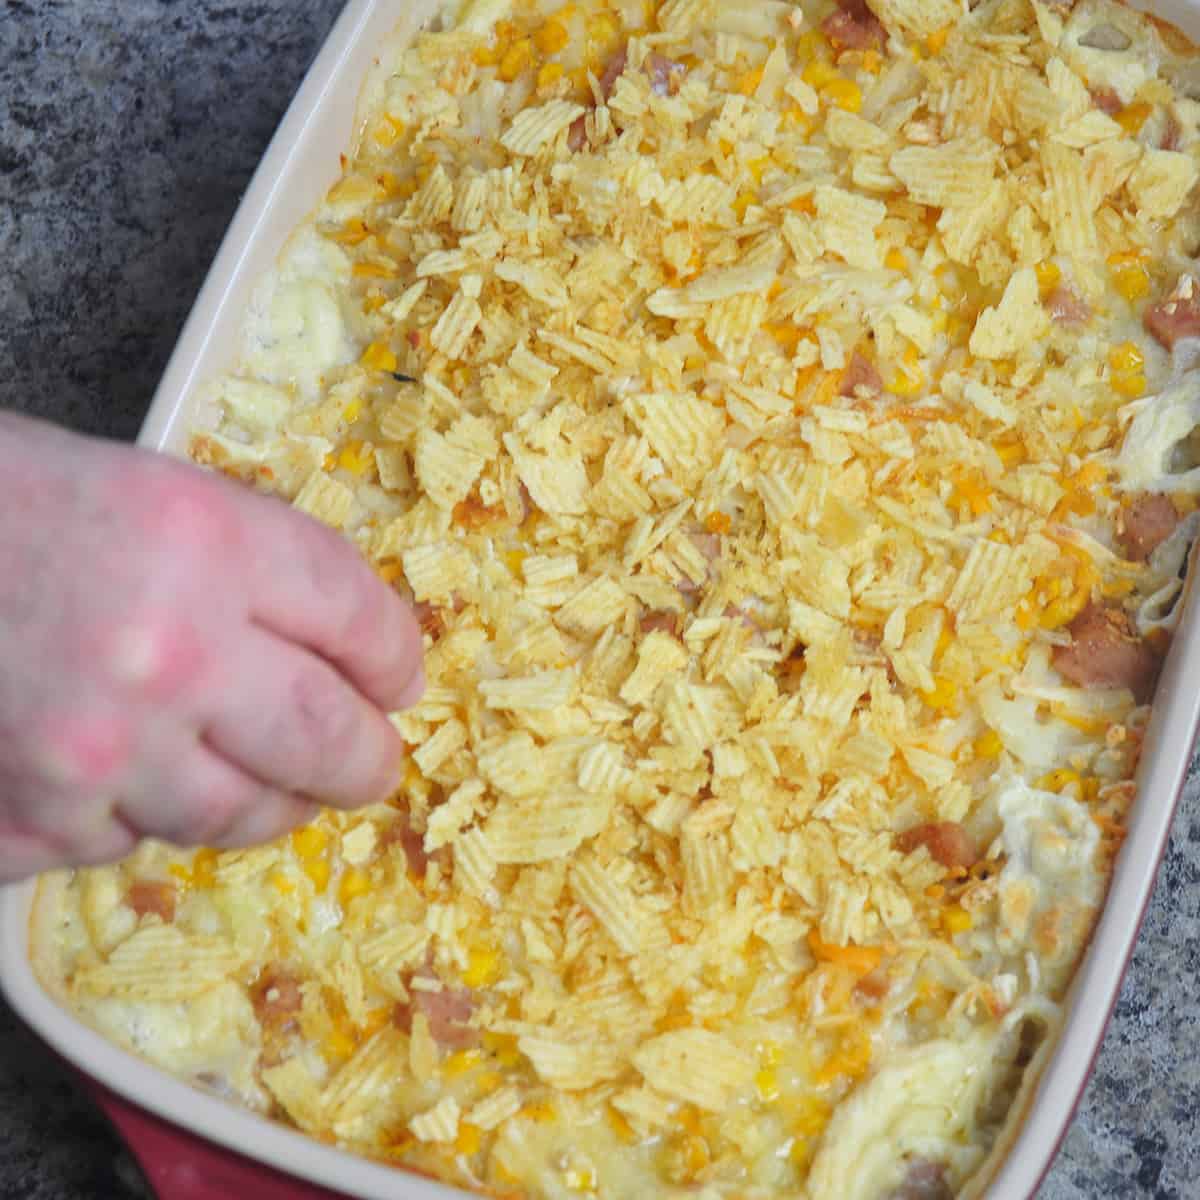 A hand sprinkling crumbled potato chips over casserole.